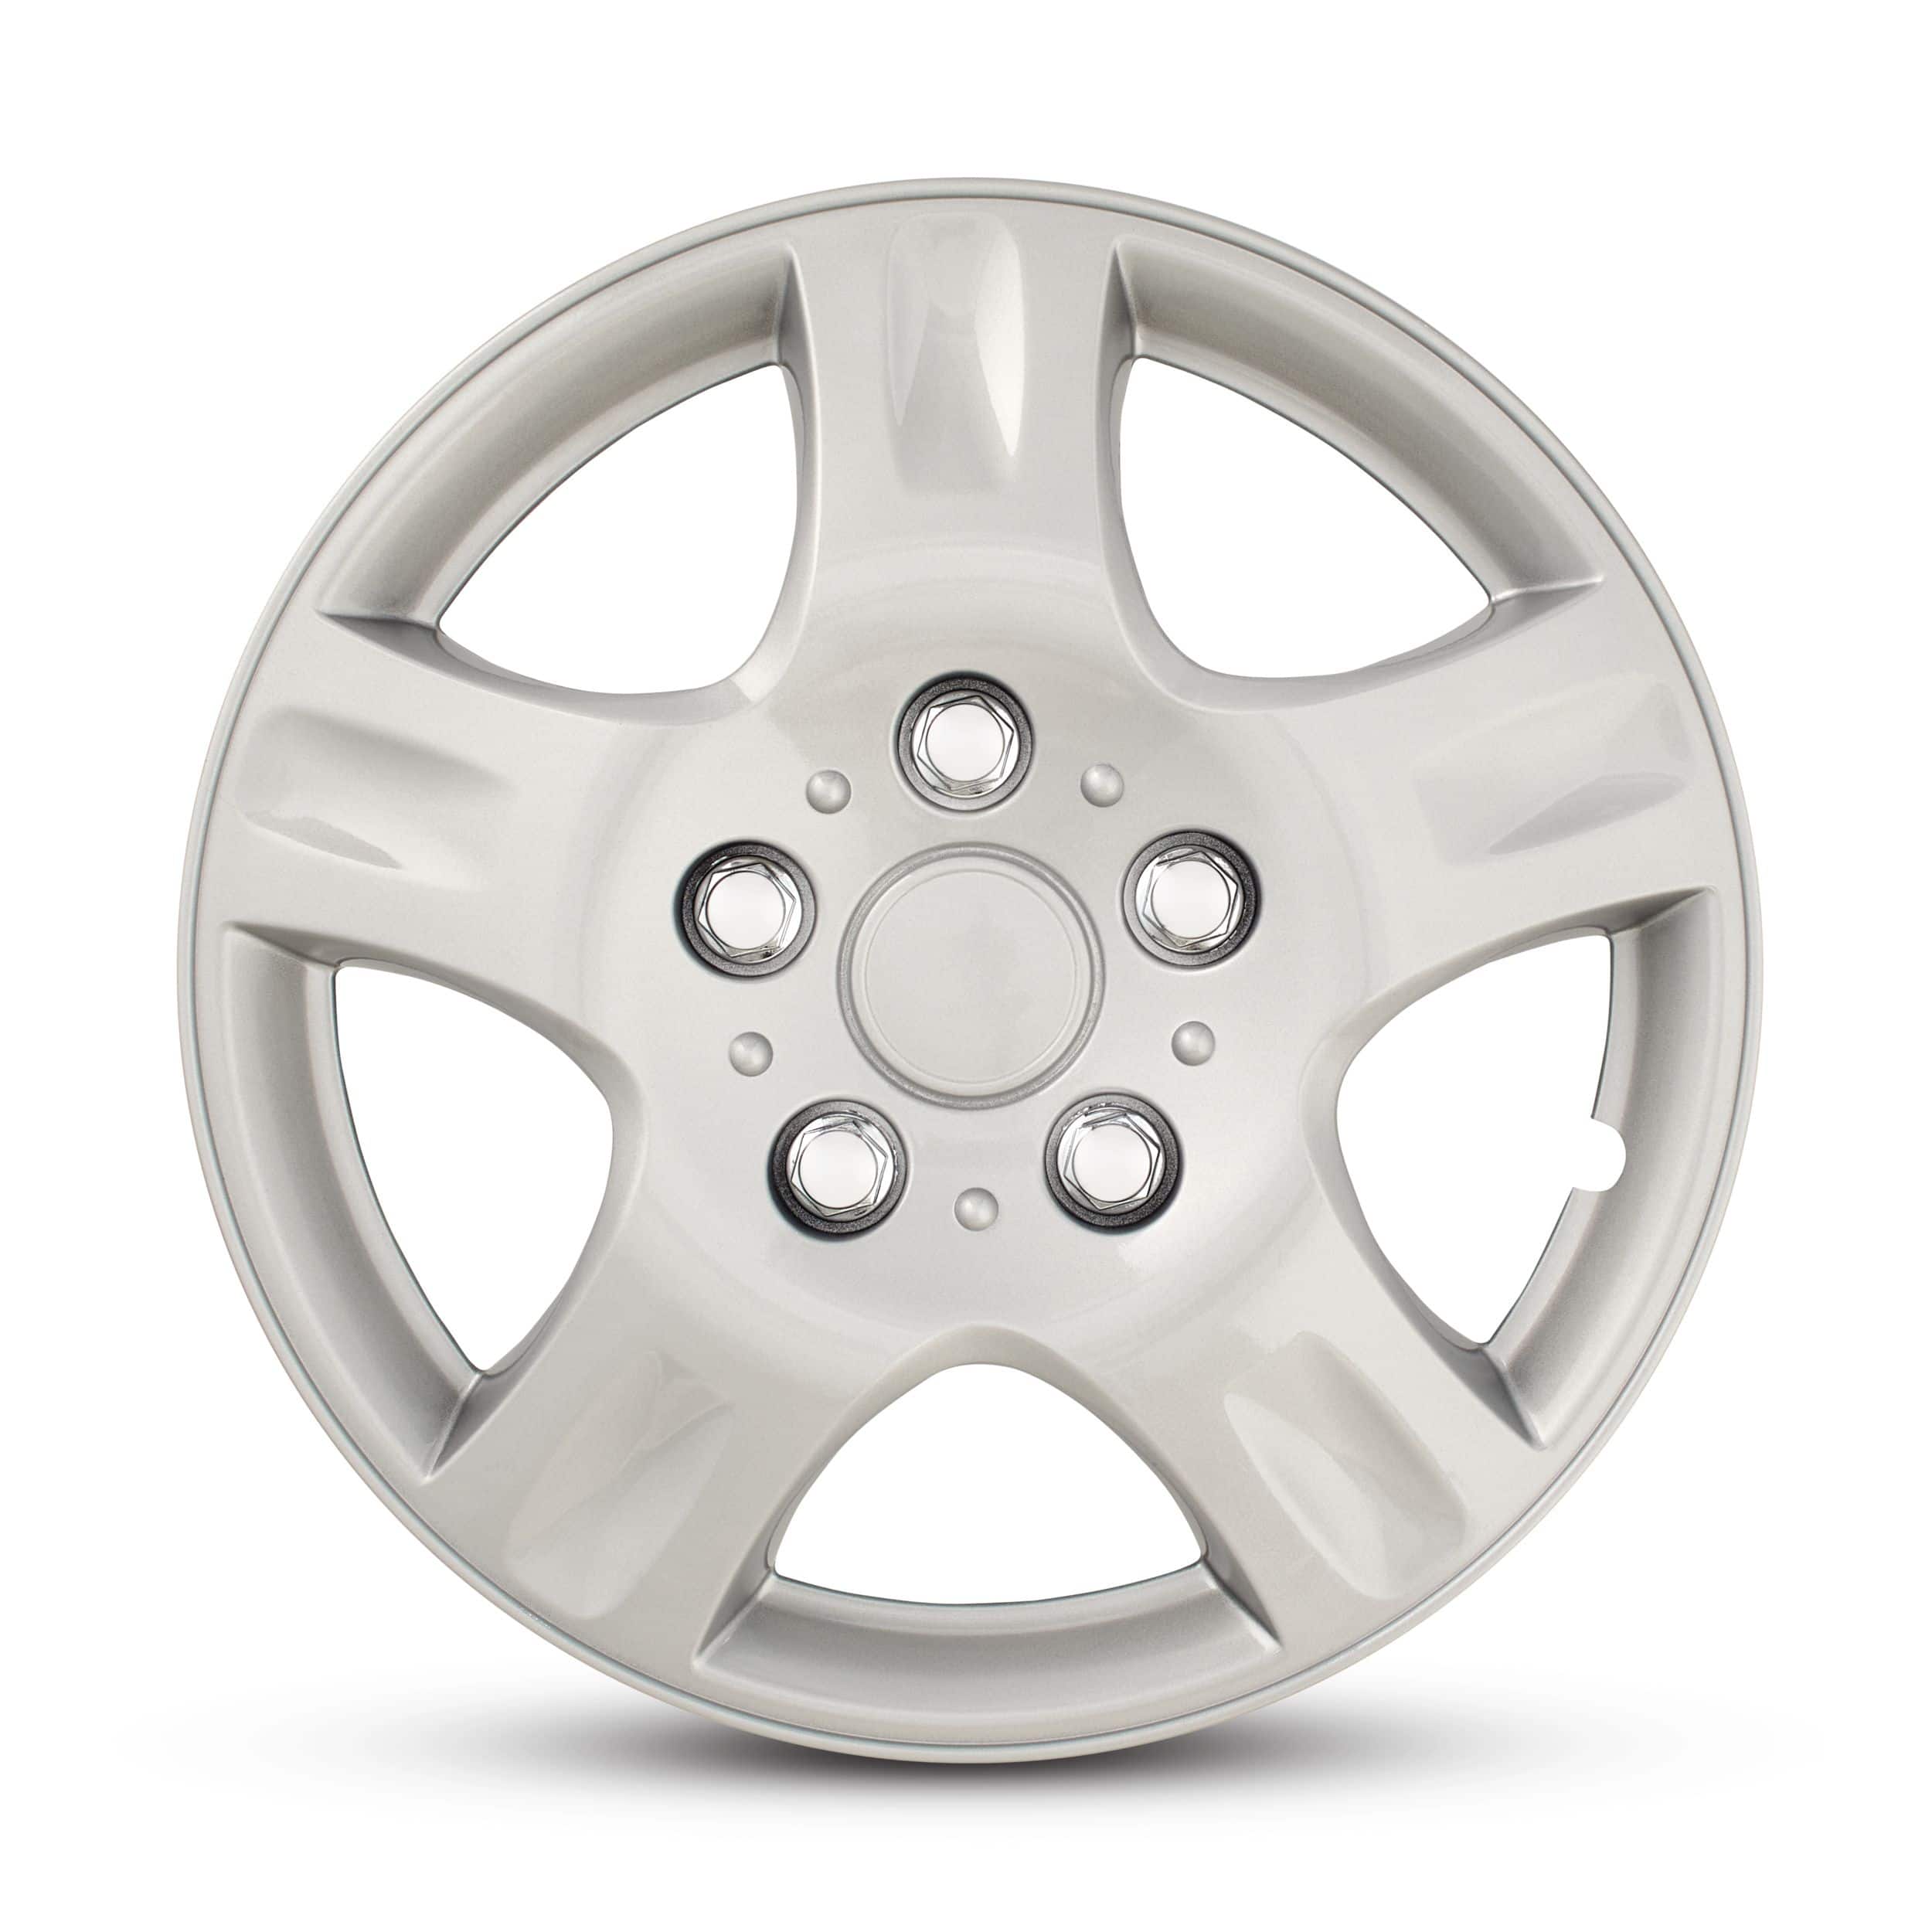 AutoTrends Wheel Cover, Silver 14-in, 4-pk